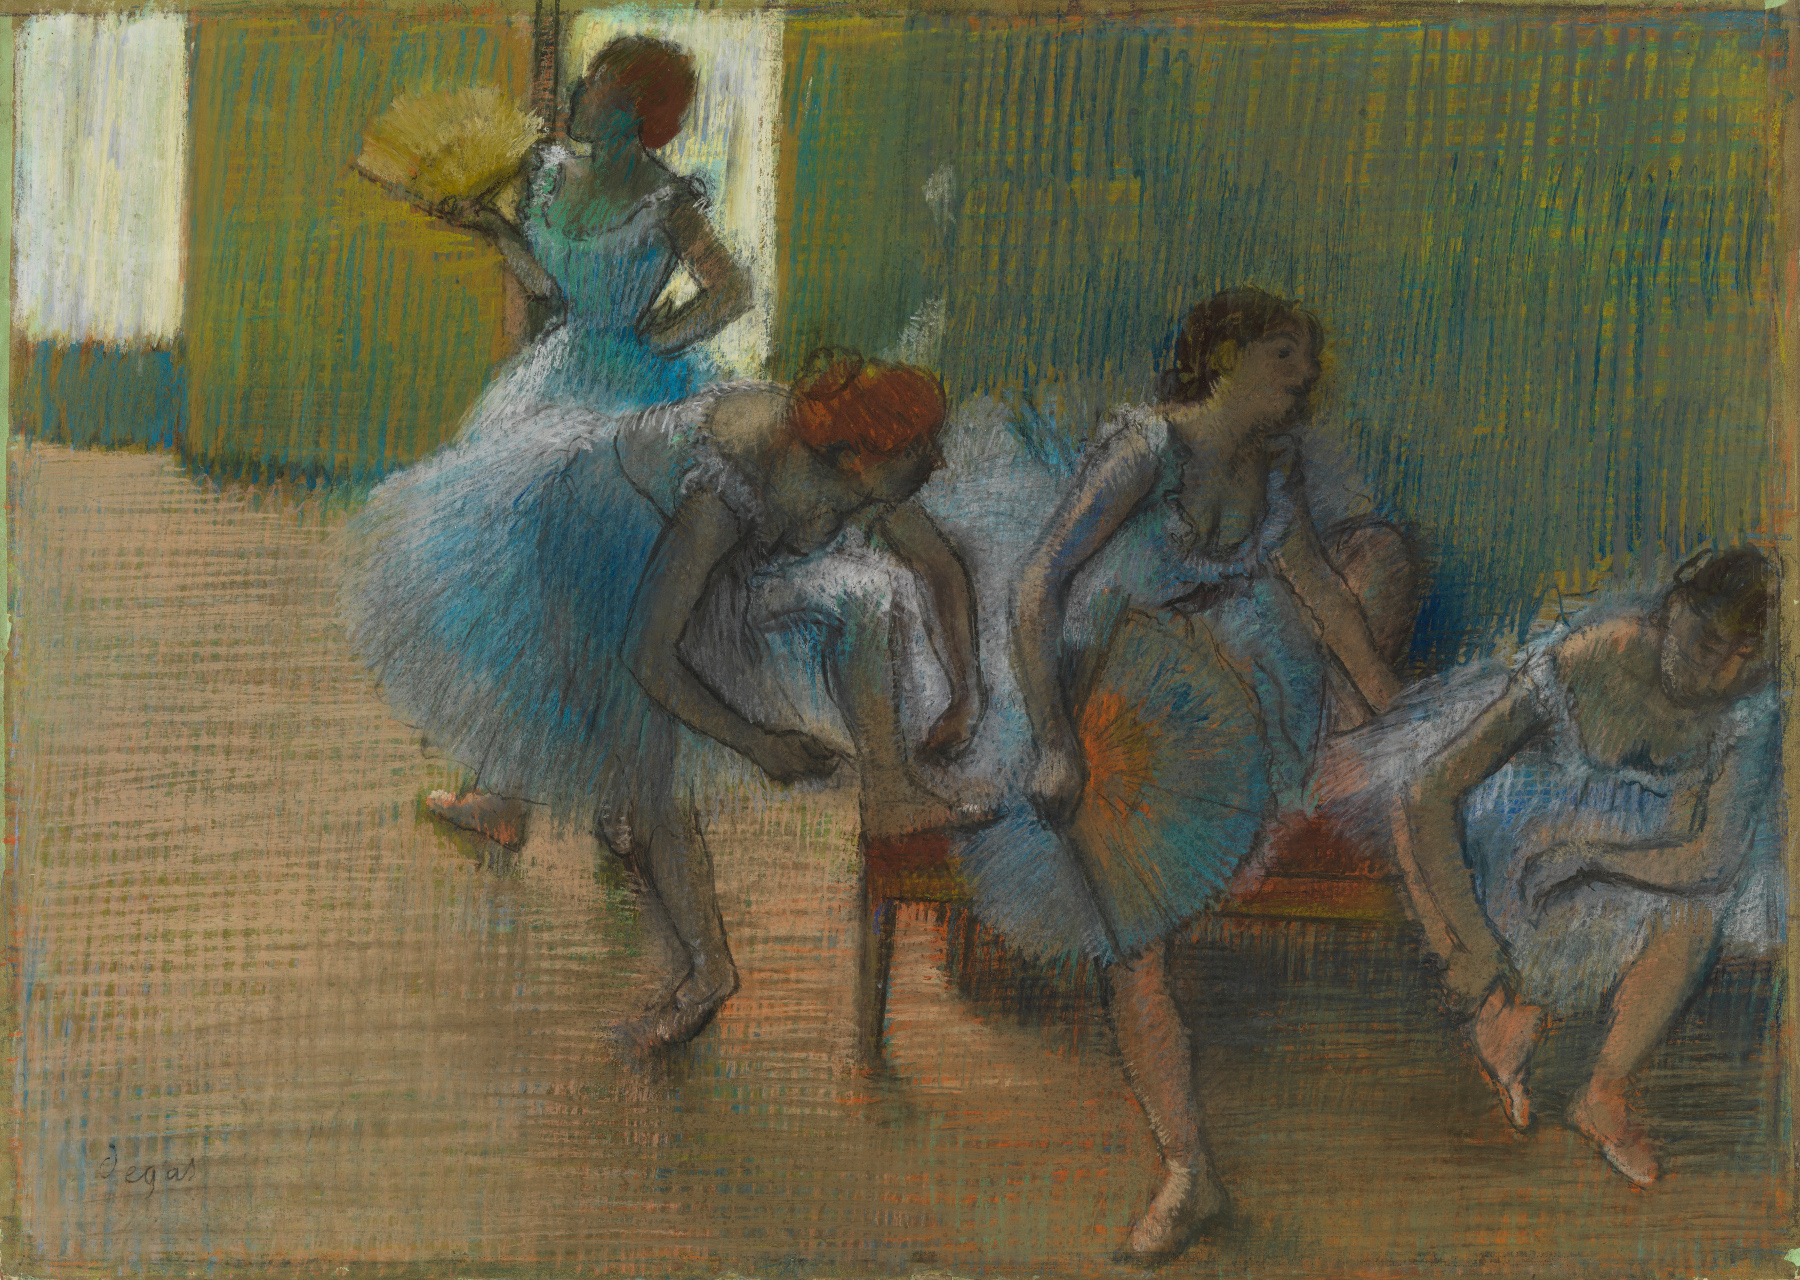 Impressionists on Paper Edgar Degas, Dancers on a Bench, c. 1898. Pastel on tracing paper, 53.7 x 75.6 cm. Lent by Glasgow Life (Glasgow Museums) on behalf of Glasgow City Council. Bequeathed by William McInnes, 1944. Photo: © CSG CIC Glasgow Museums Collection